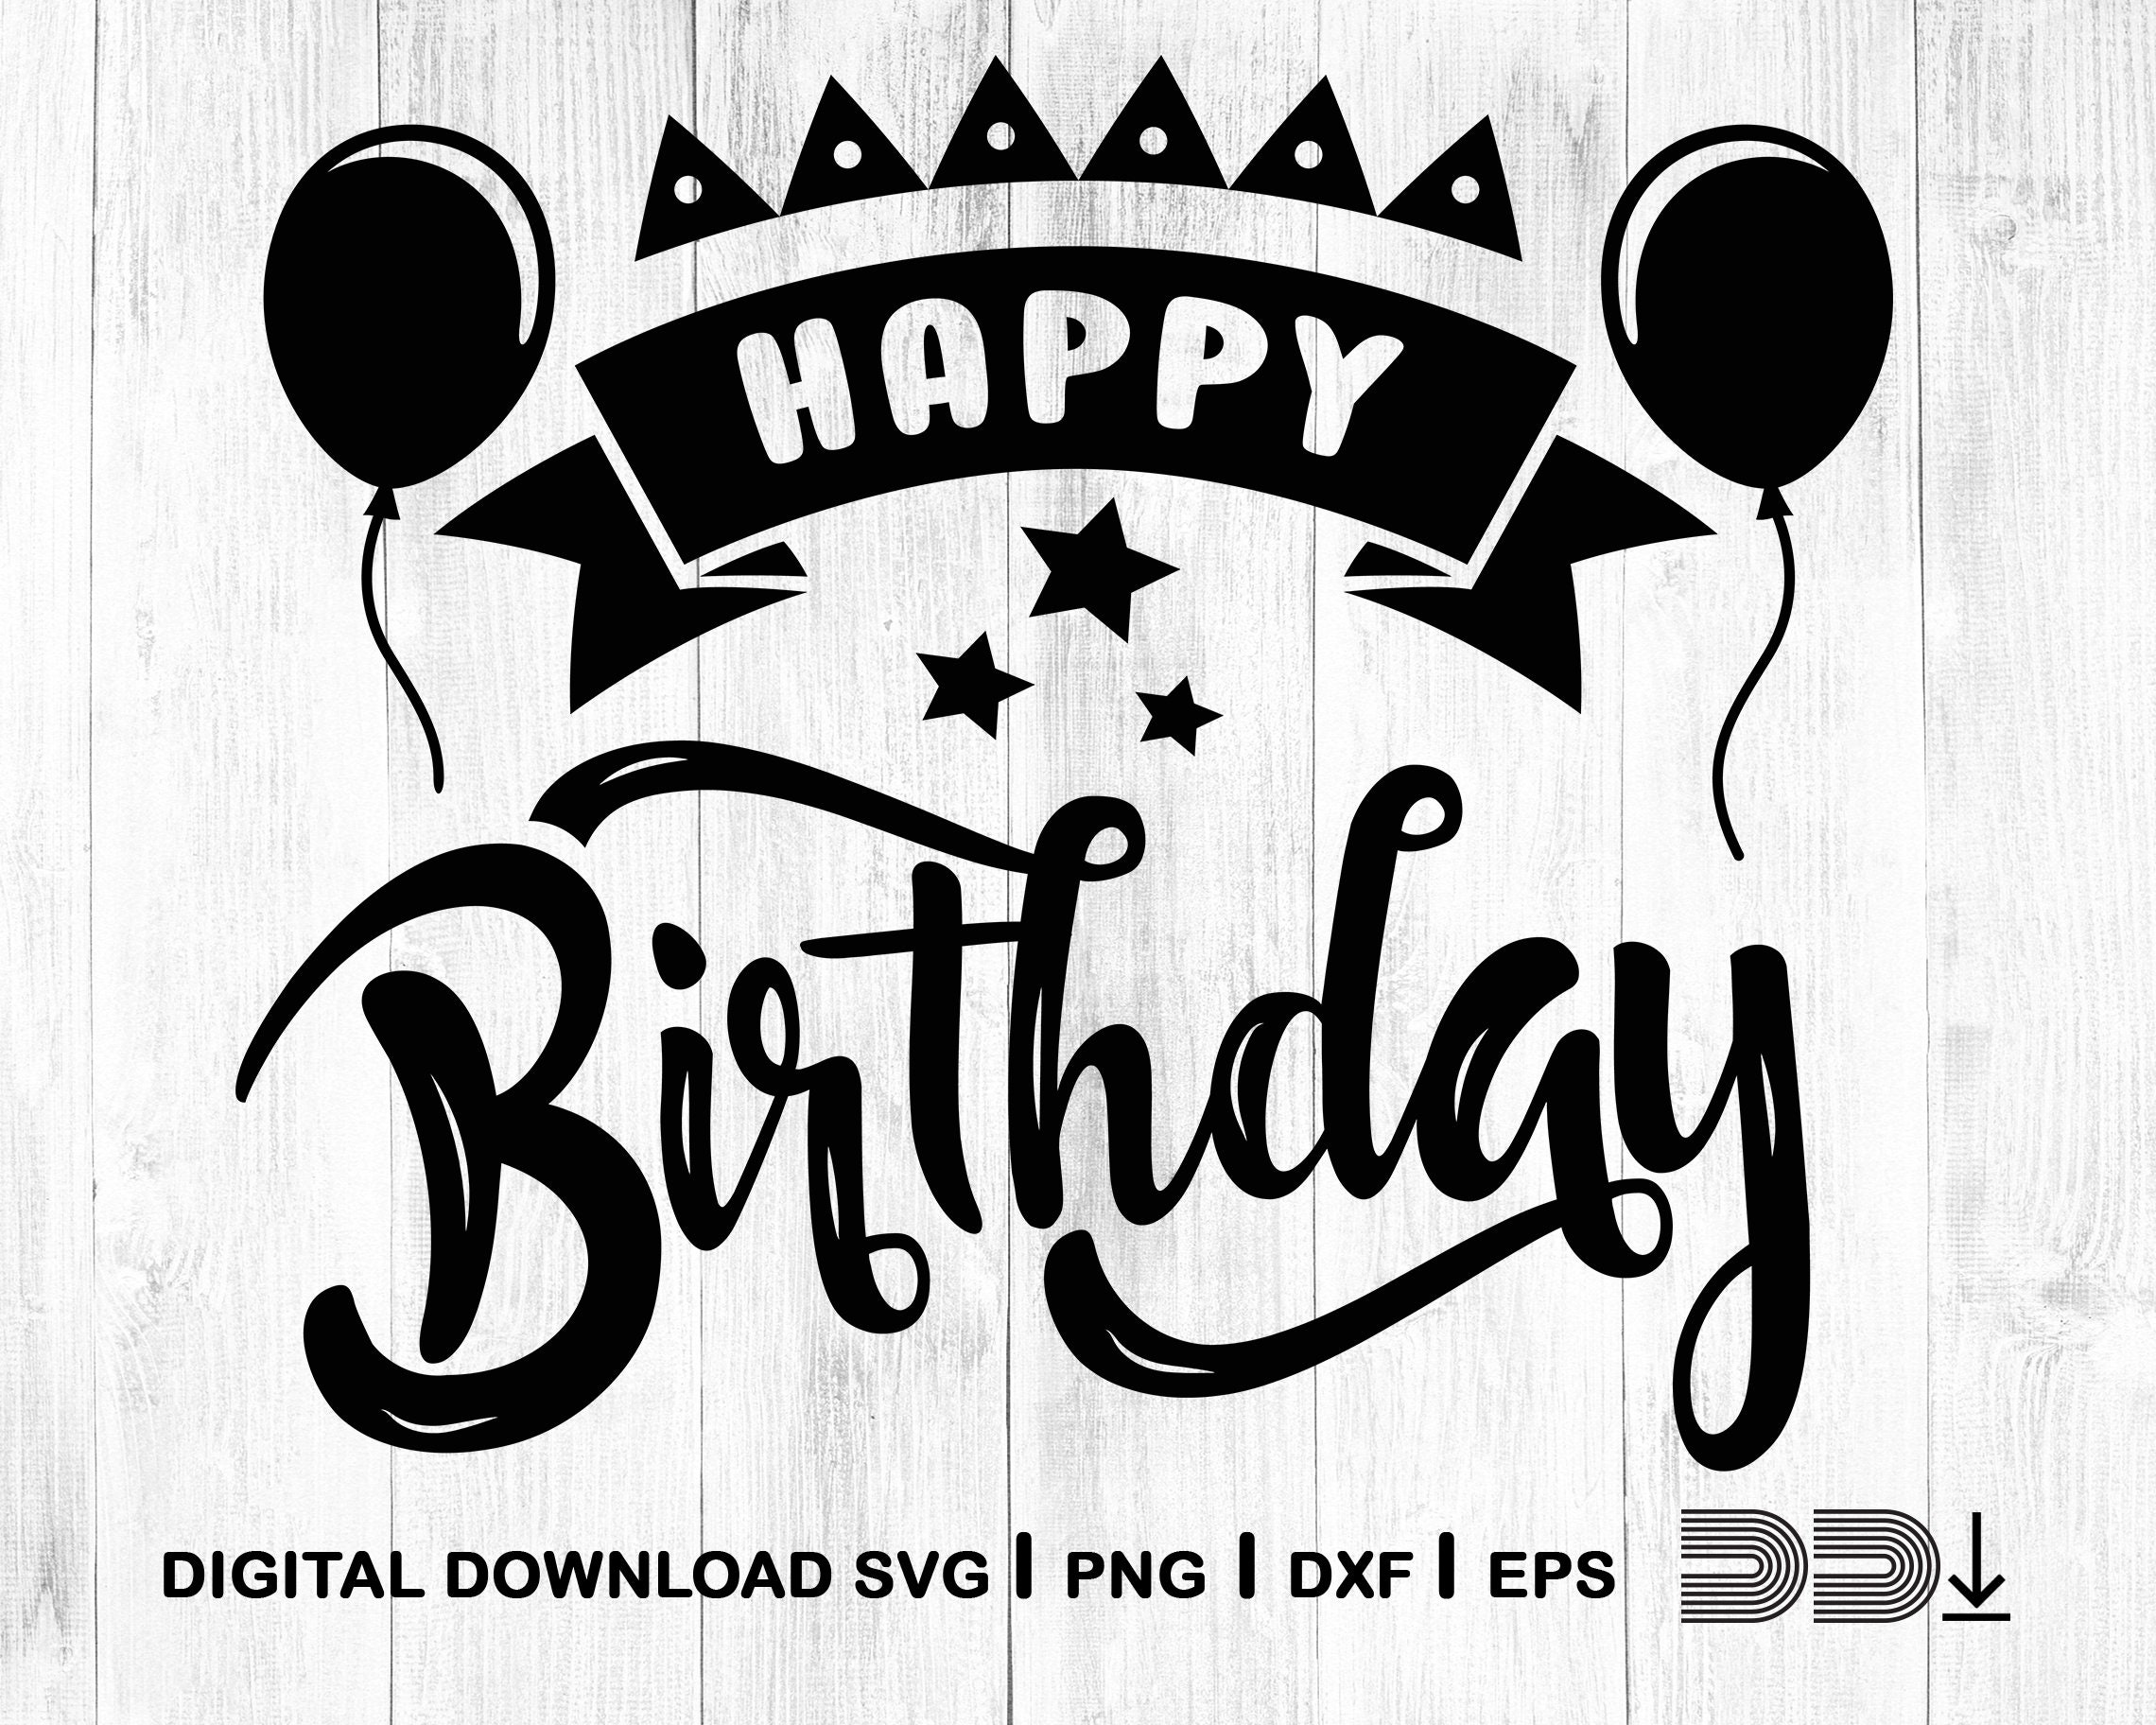 Happy Birthday Svg Cut Files Clipart Bundle Images